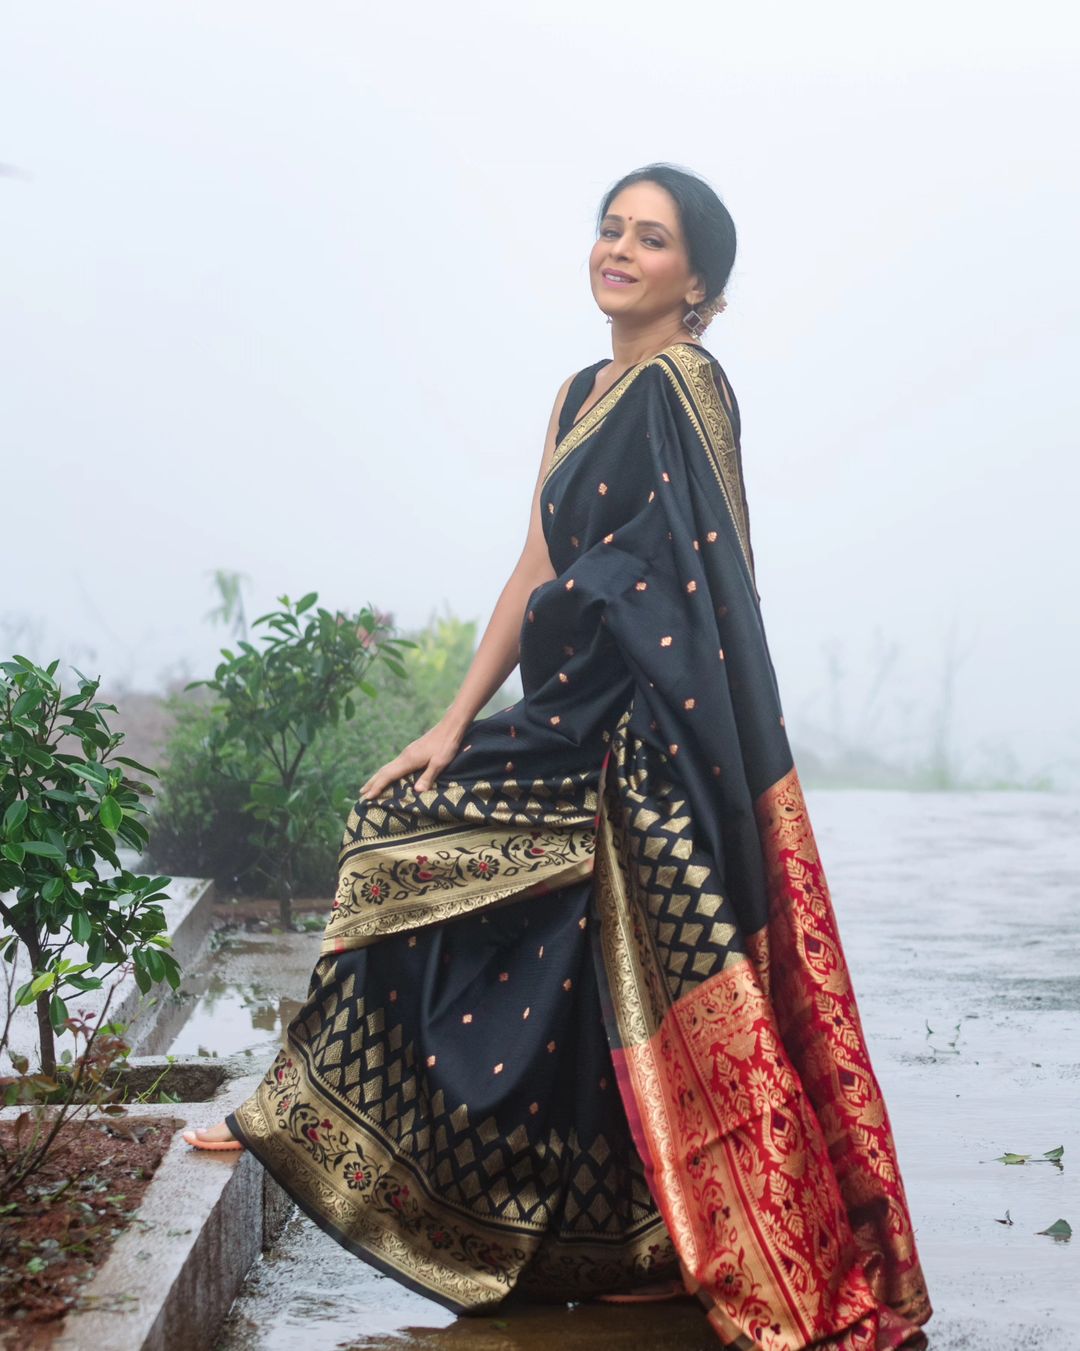 In Pics: Times when Ankita Lokhande slayed in a saree